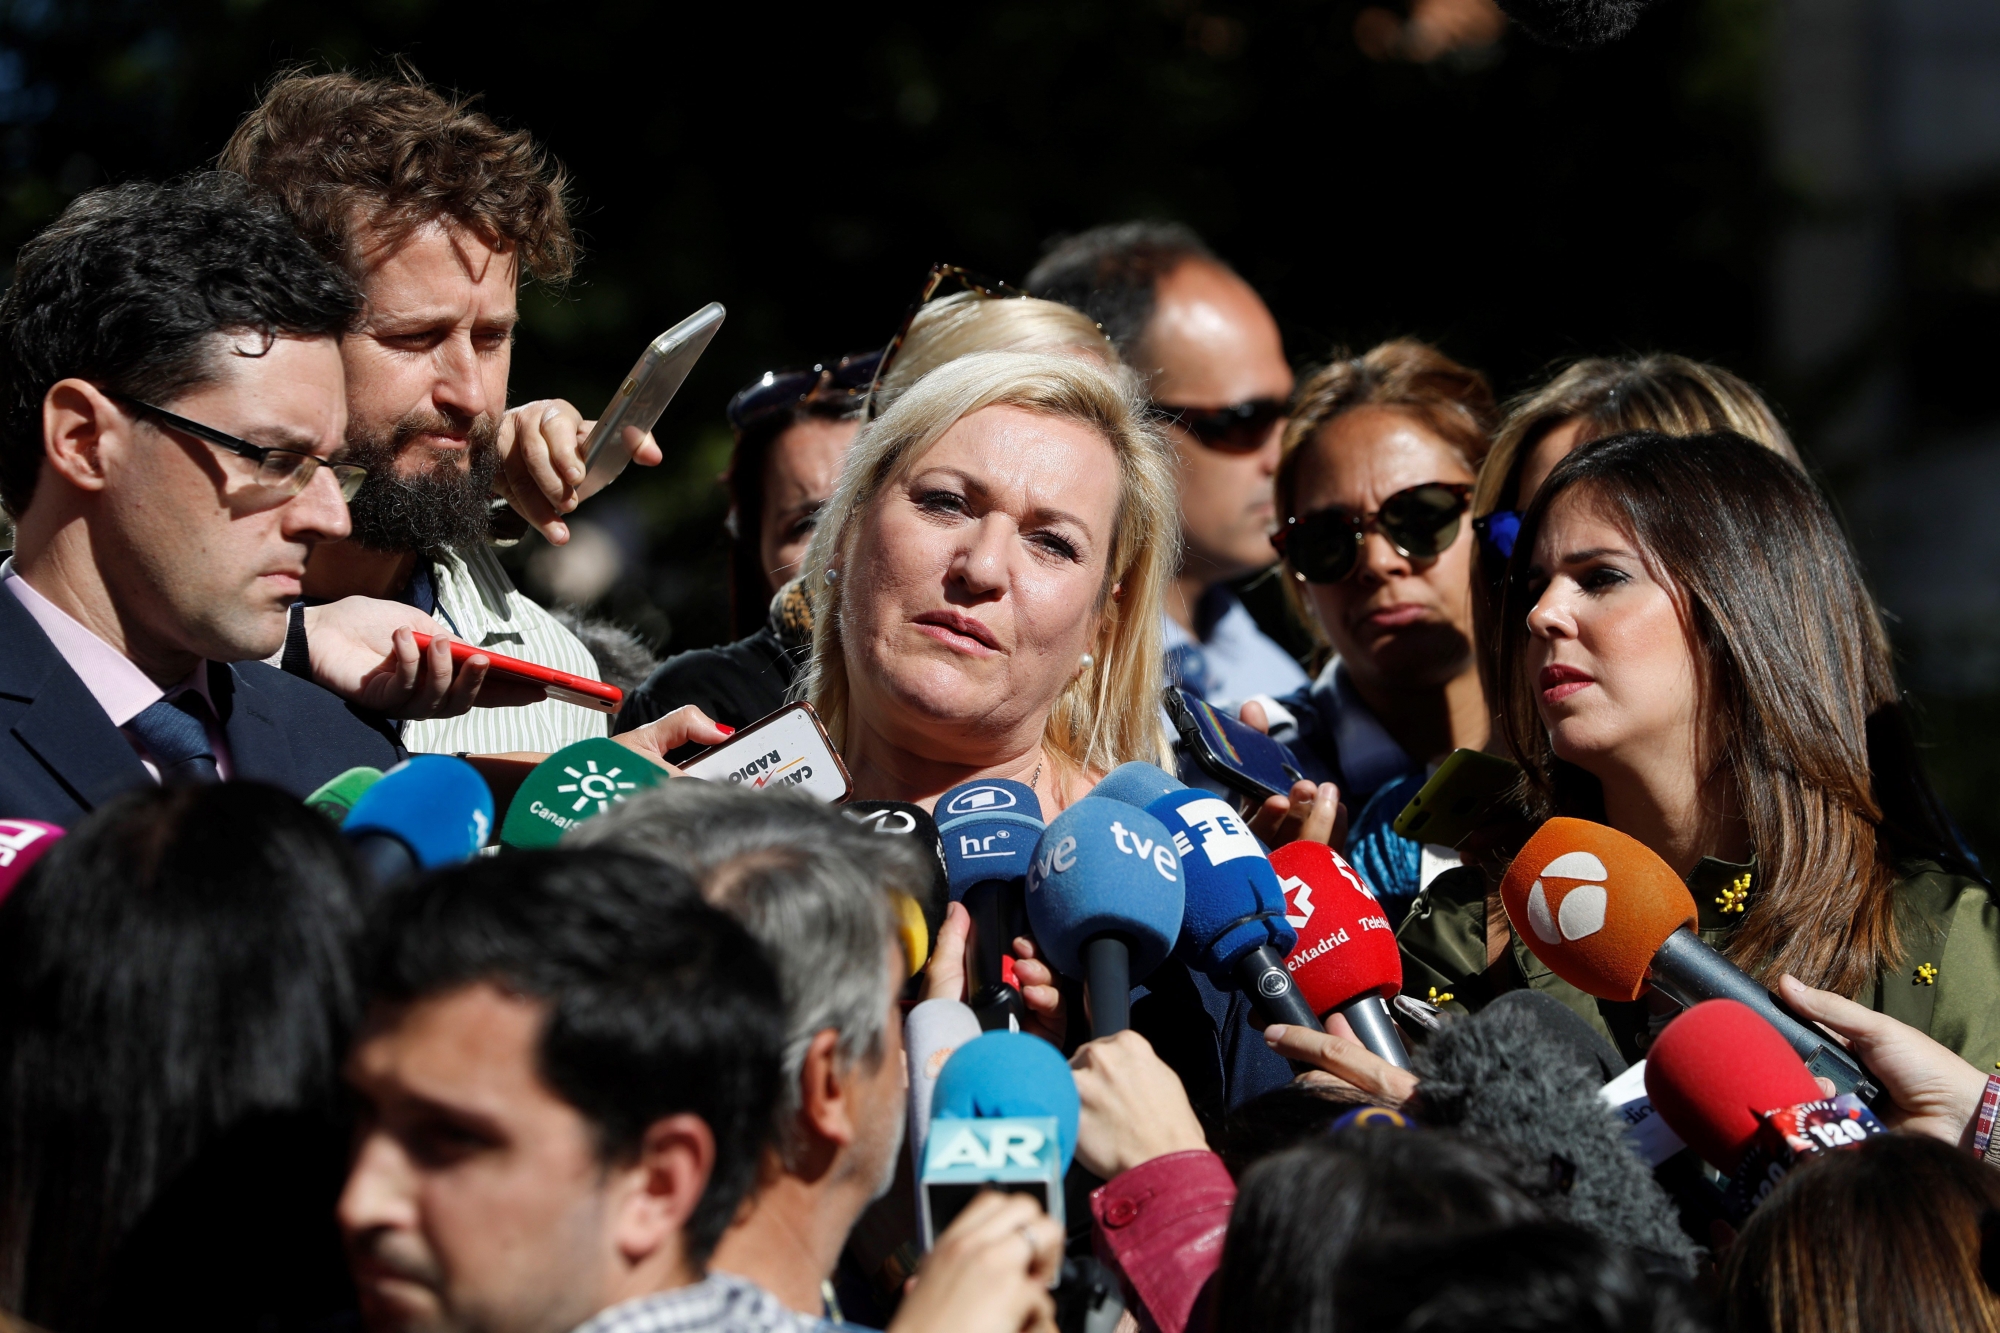 epa07078971 Ines Madrigal (C), snatched from her mother and given away to a sterile woman when she was born in 1969, talks to the media outside of the court in Madrid, Spain, 08 October 2018. Dr. Eduardo Vela was on trial accused of being involved in the stealing of Ines Madrigal when she was born back in 1969. Now, the court has ruled that Ines Madrigal was in fact stolen by Eduardo Vela, currently 85 years old, but he has been cleared as charges exceeded the statue of limitations. This is the first trial against one of the alleged stolen babies cases in Spain. Thousands of babies were allegedly stolen at birth in Spain between 1960 and 1989 by a group of nuns, doctors and other officials who sold the children for profit. The General Attorney was demanding 11 years of imprisonment.  EPA/J.J. GUILLEN SPAIN JUSTICE STOLEN BABIES CASE